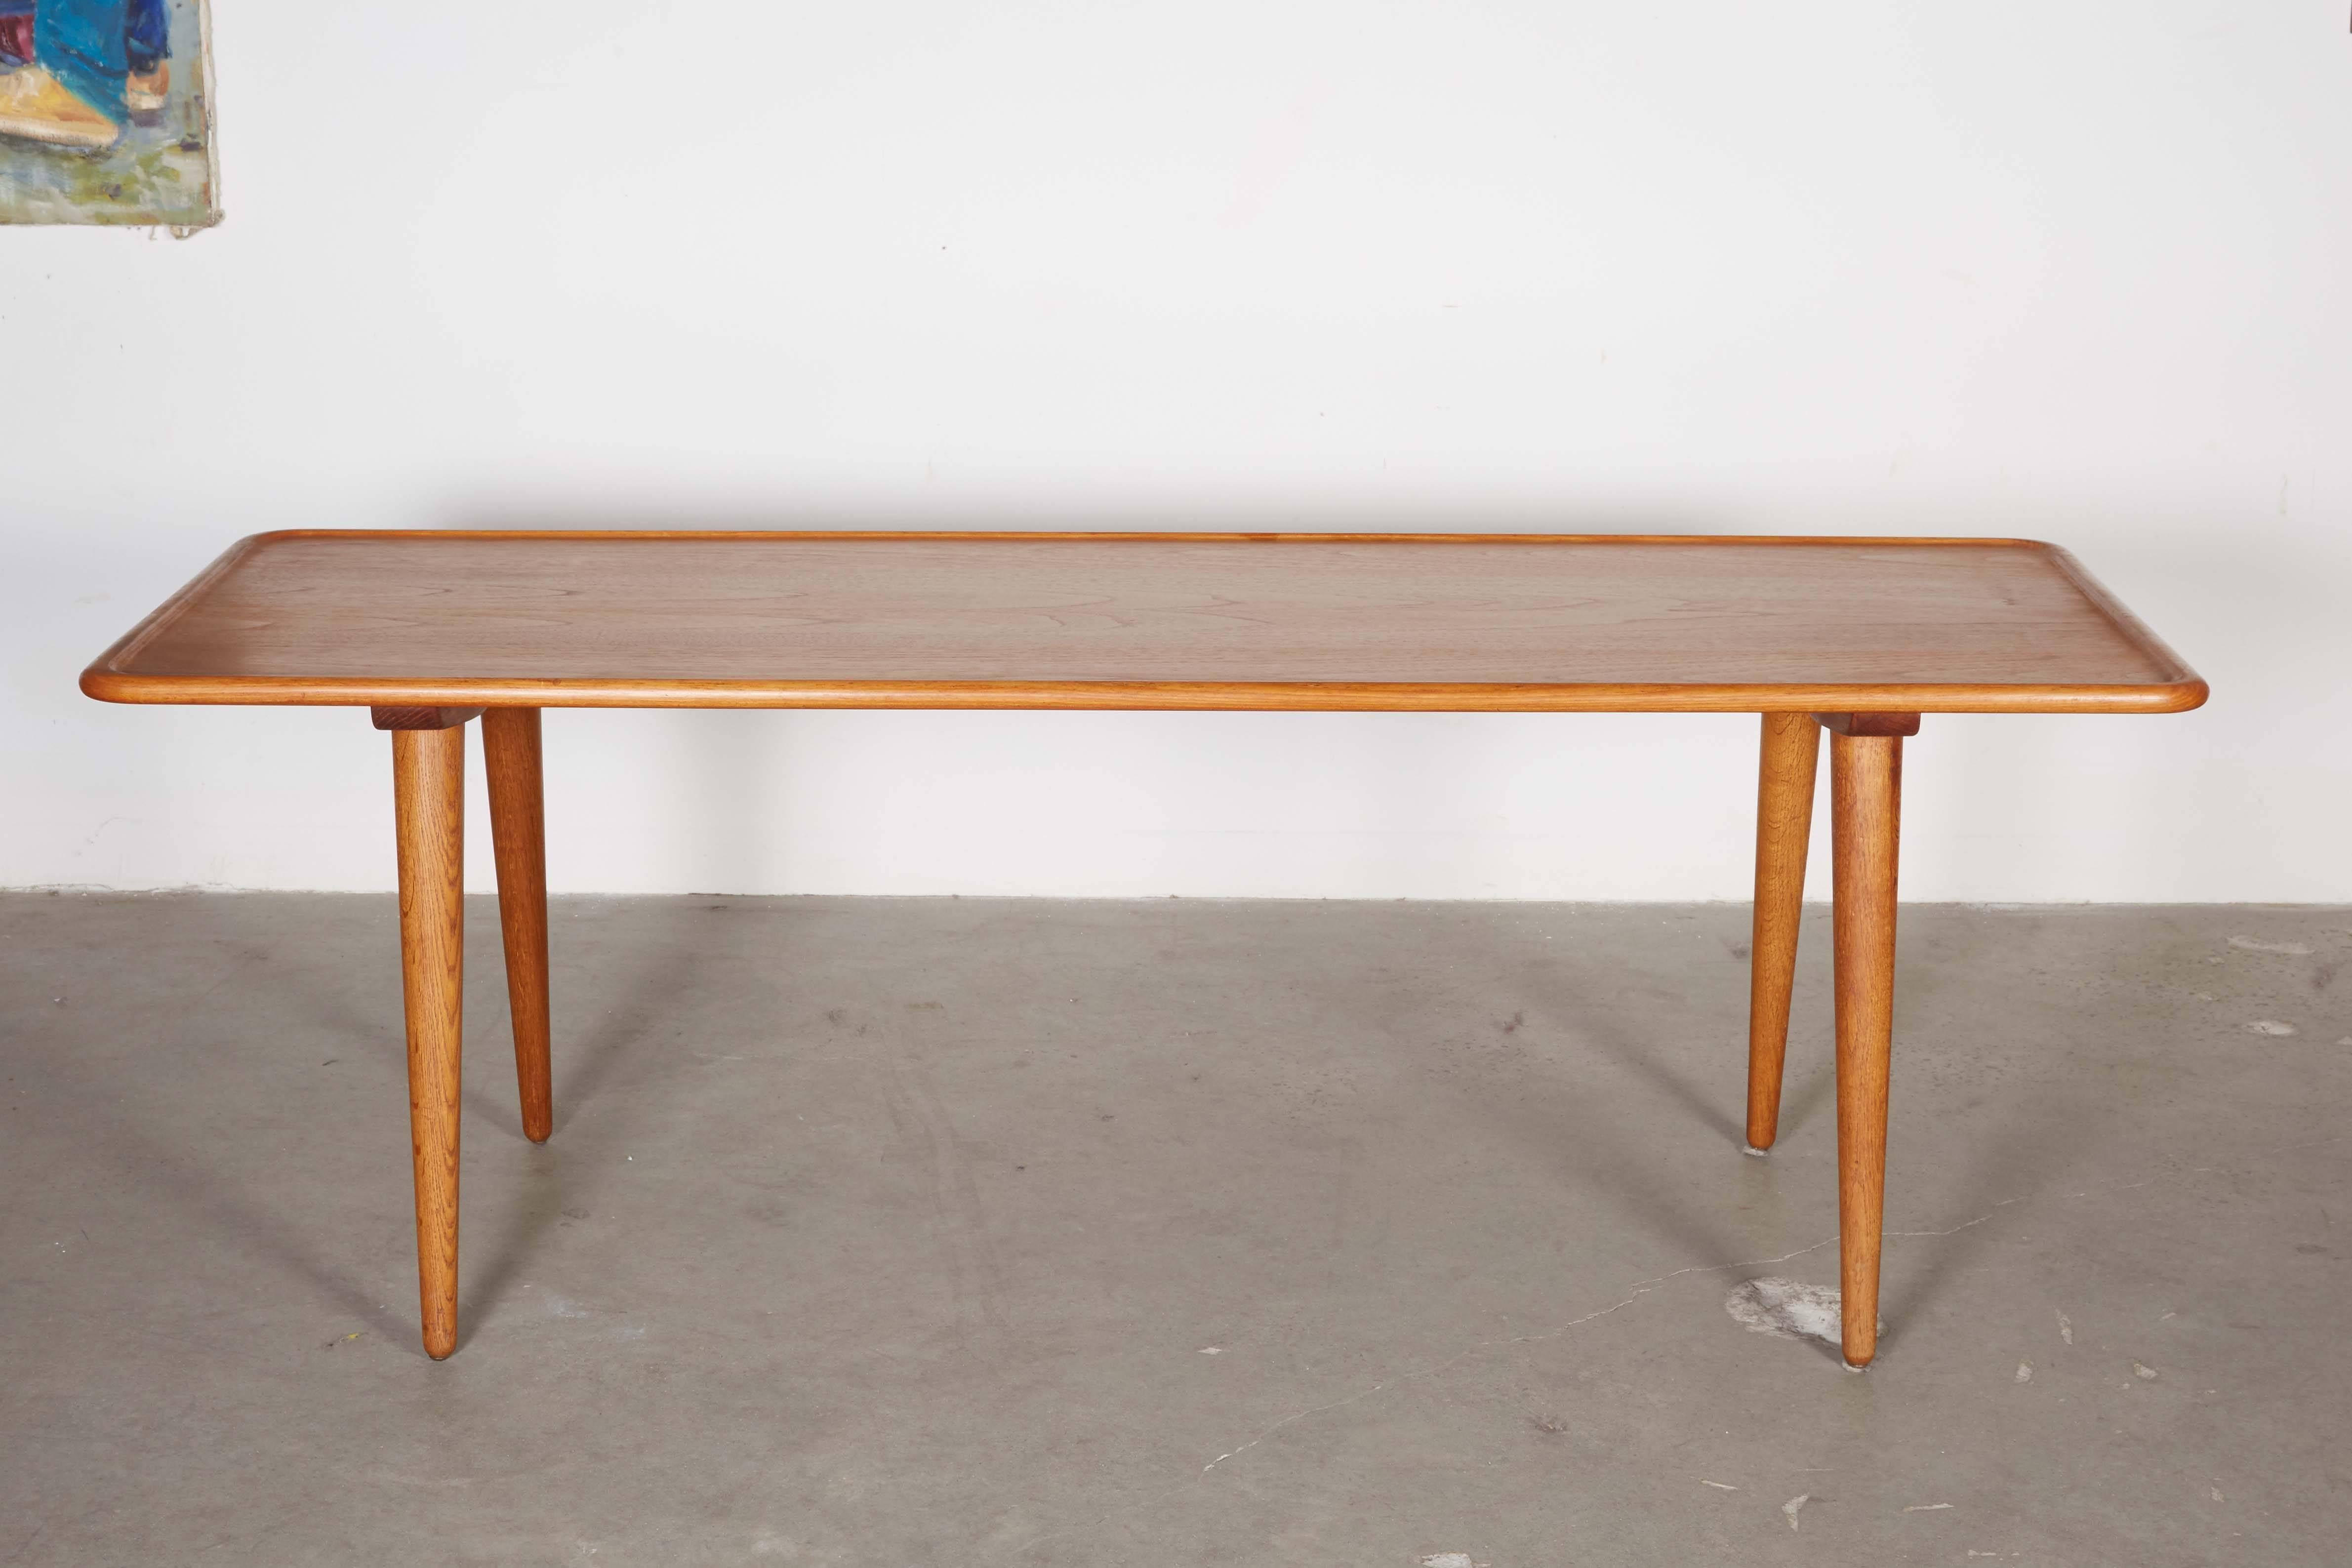 Mid Century 1950s Hans Wegner Coffee Table

This teak coffee table is in excellent condition. In traditional Wegner style, the legs are oak and the top is teak. Ready for pick up, delivery, or shipping anywhere in the world. 